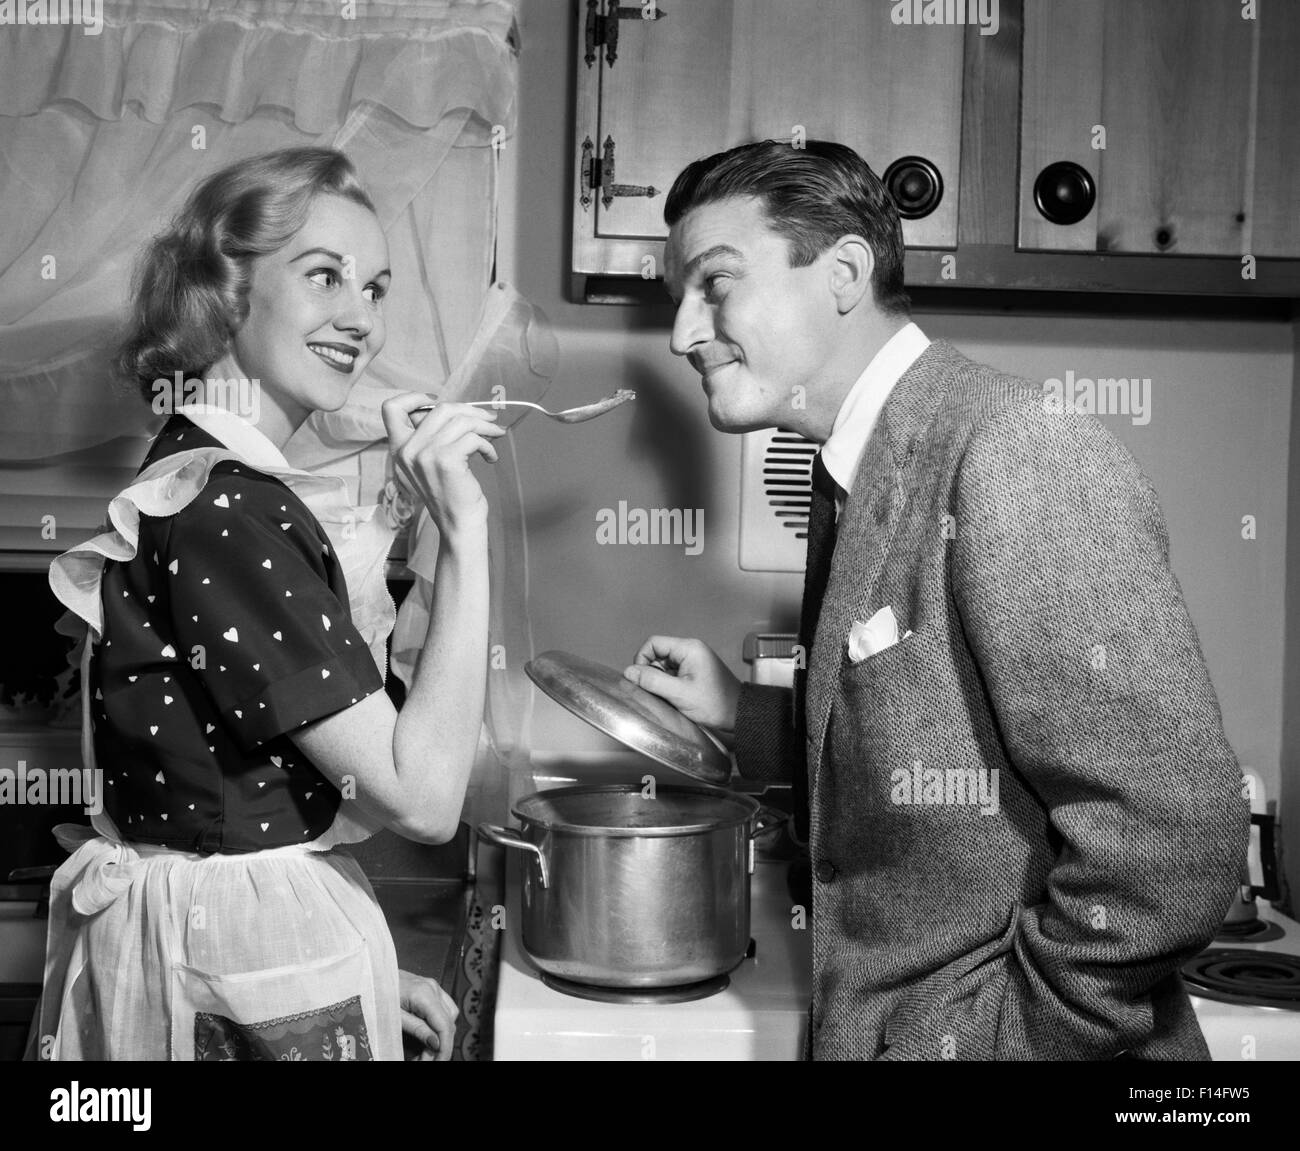 1950s SMILING HOUSEWIFE AT STOVE GIVING HAPPY HUSBAND TASTE OF HER COOKING Stock Photo